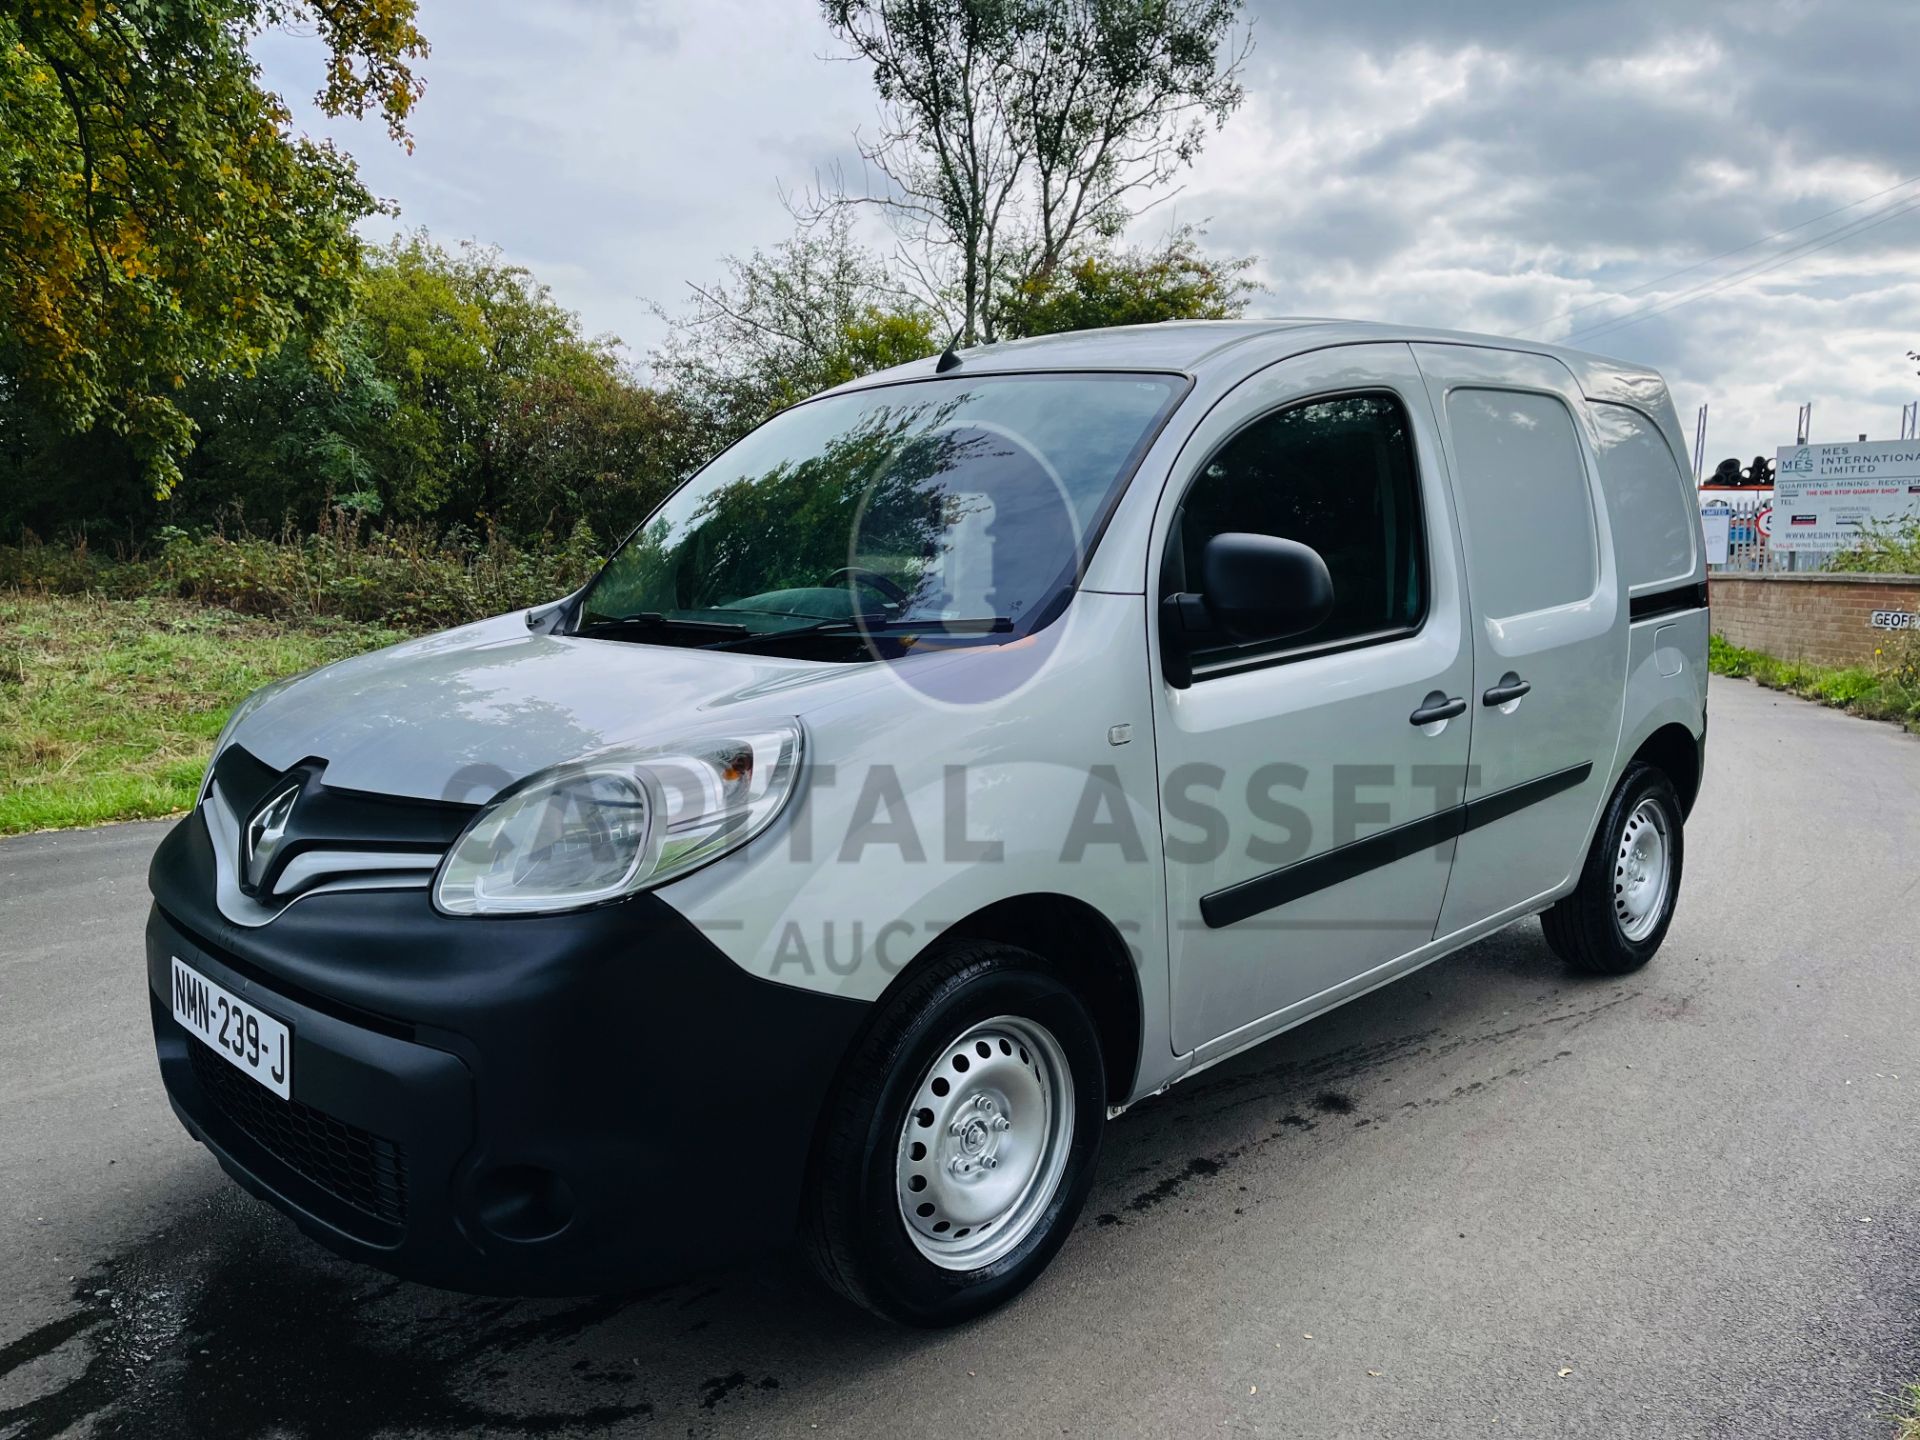 RENAULT KANGOO 1.5DCI "BUSINESS EDITION" 2018 -EURO 6/STOP START (AIR CON) ELEC PACK-TWIN SIDE DOORS - Image 3 of 21